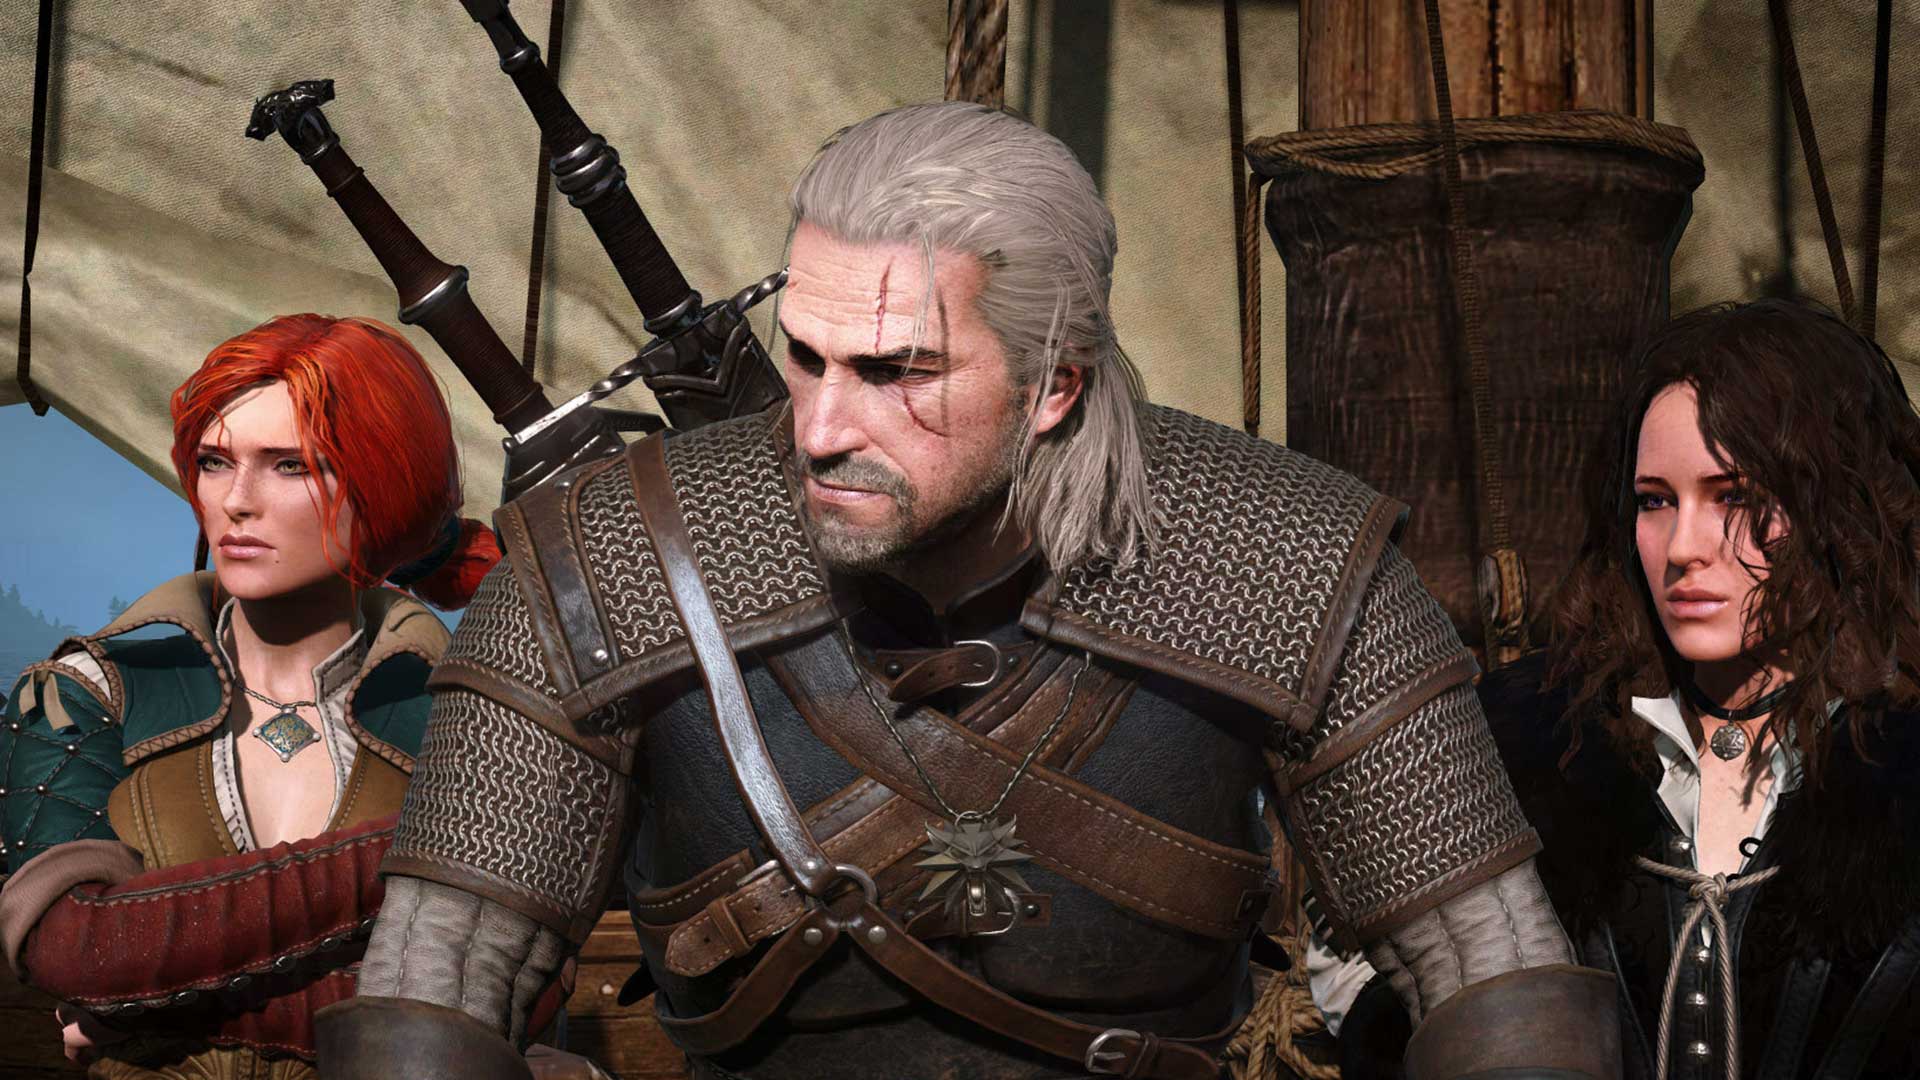 The Witcher gains performance improvements with Ray Tracing on